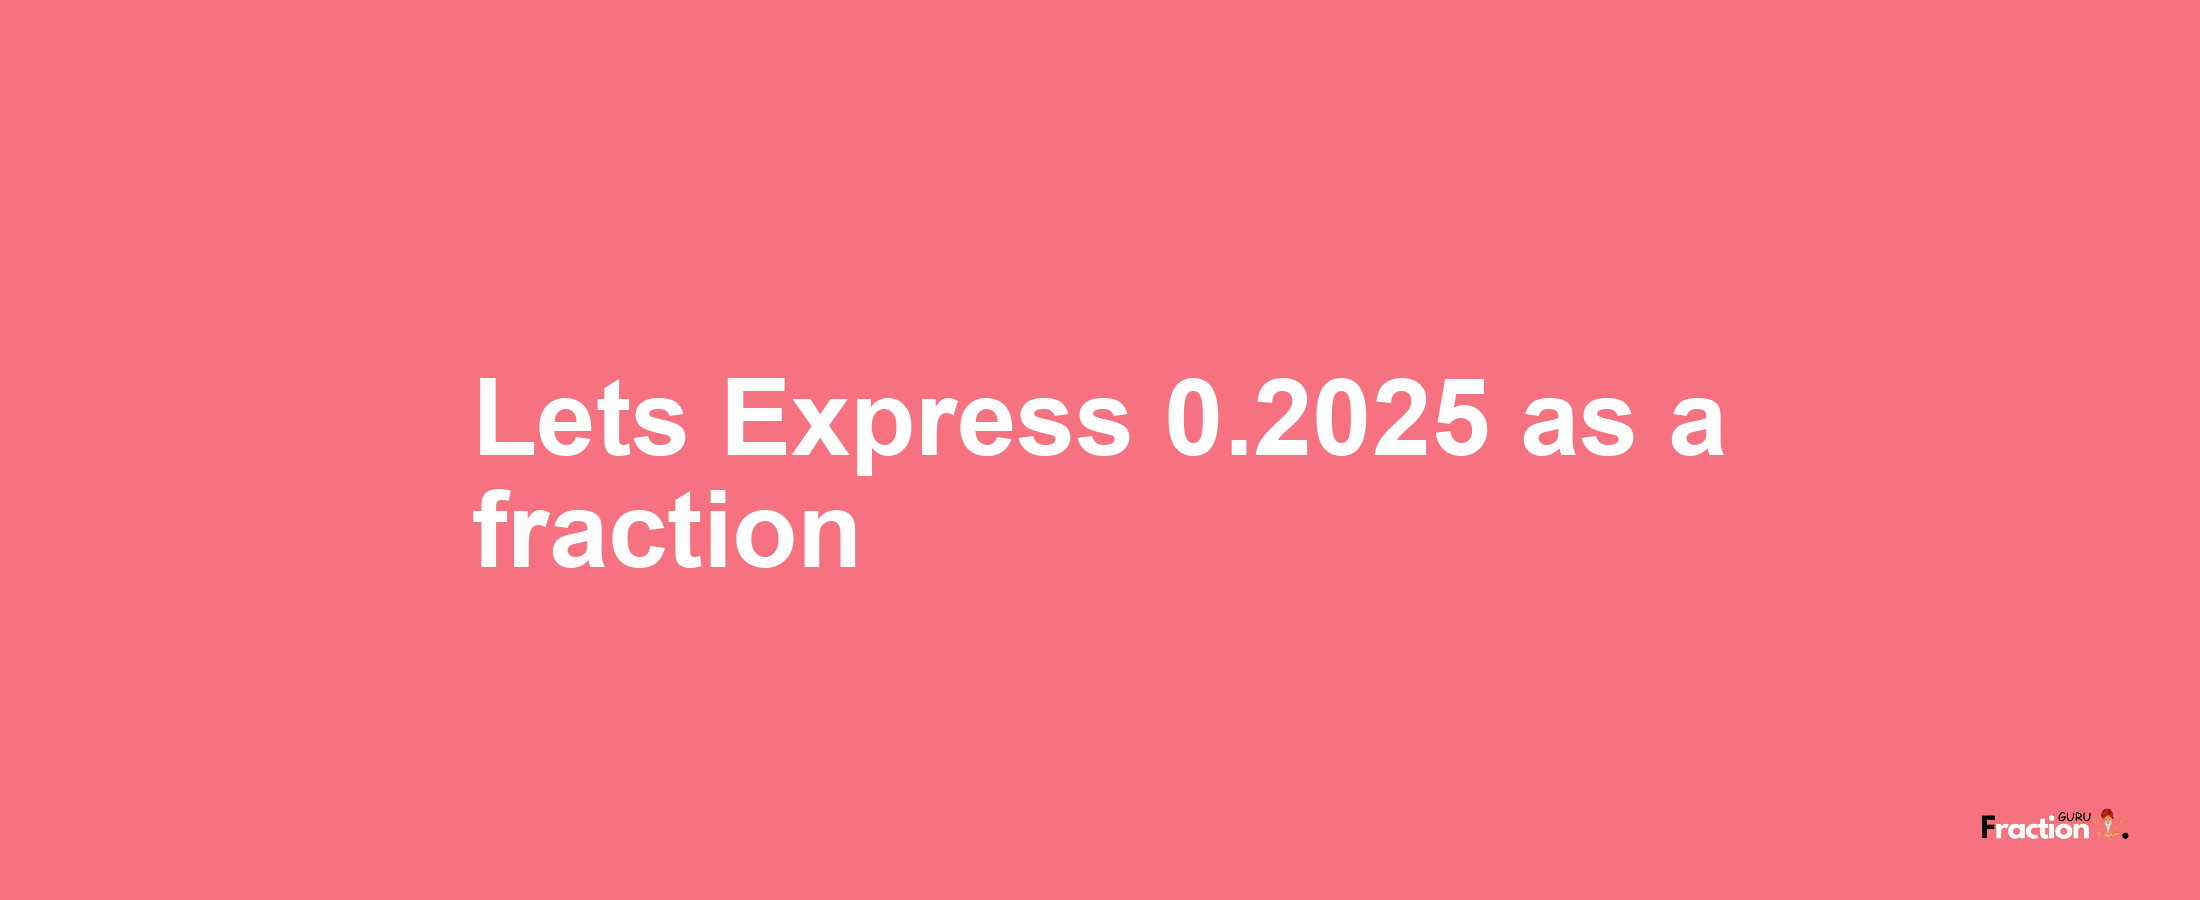 Lets Express 0.2025 as afraction